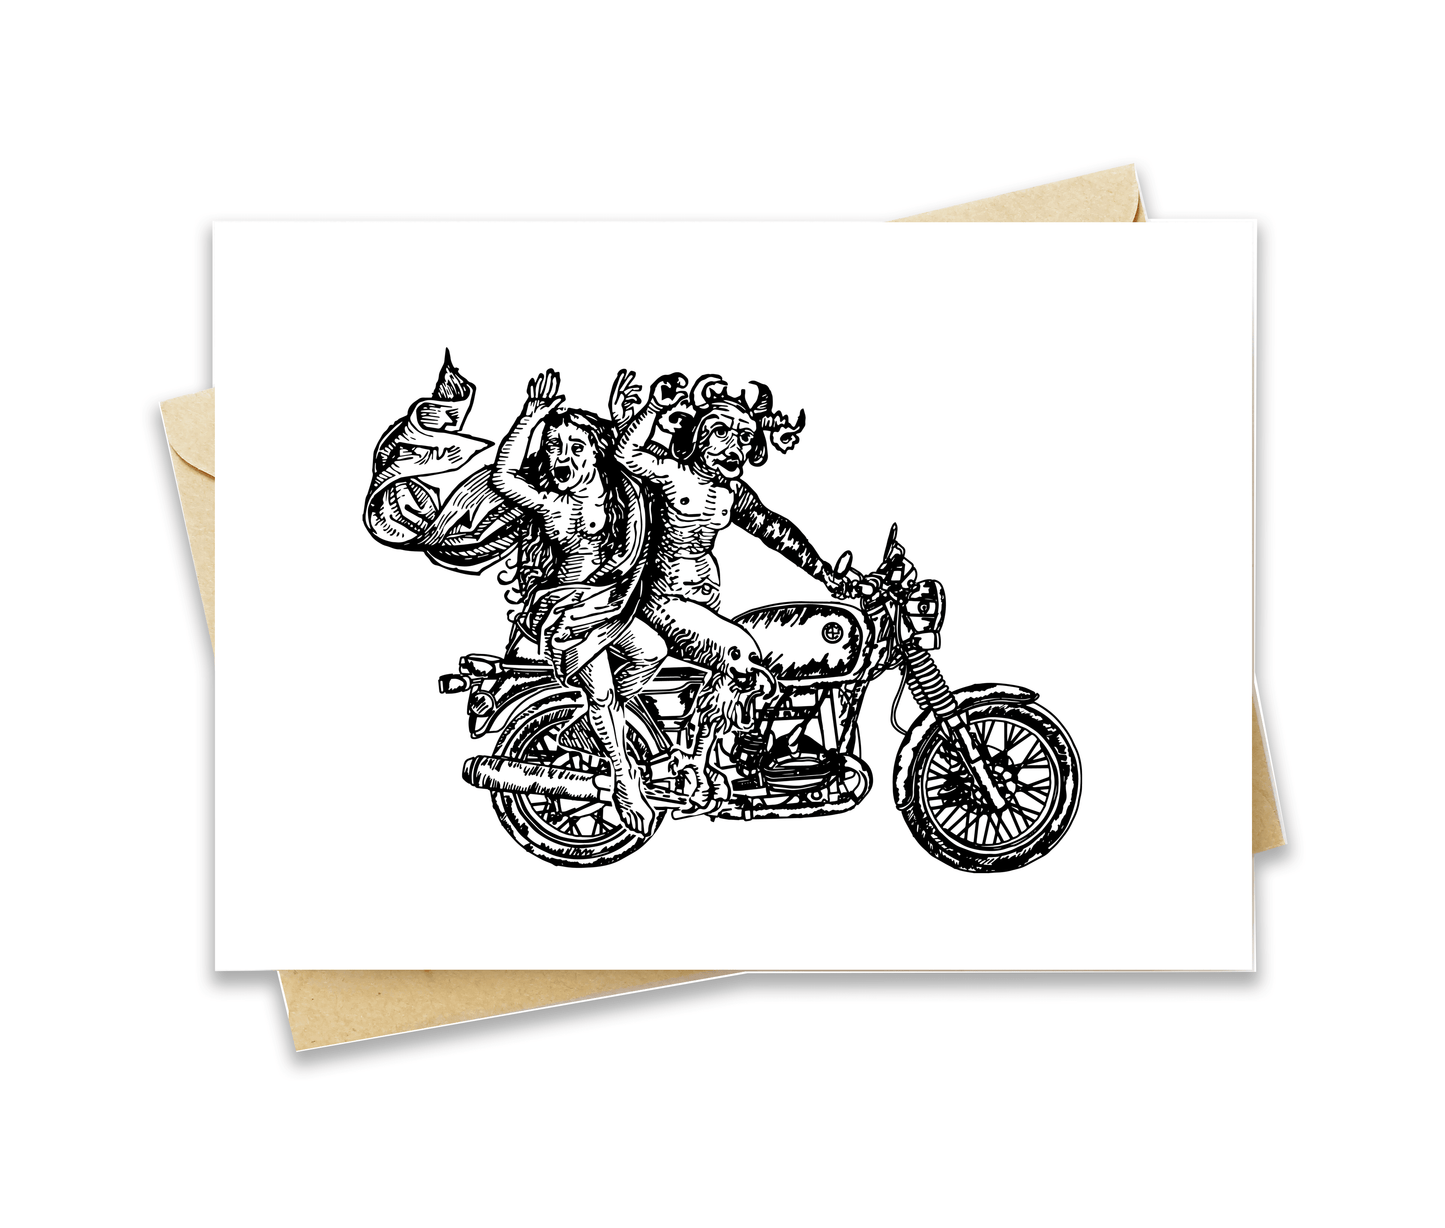 BellavanceInk: Greeting Card With A Pen & Ink Drawing Of Demon And Lady Riding Two-Up 5 x 7 Inches - BellavanceInk